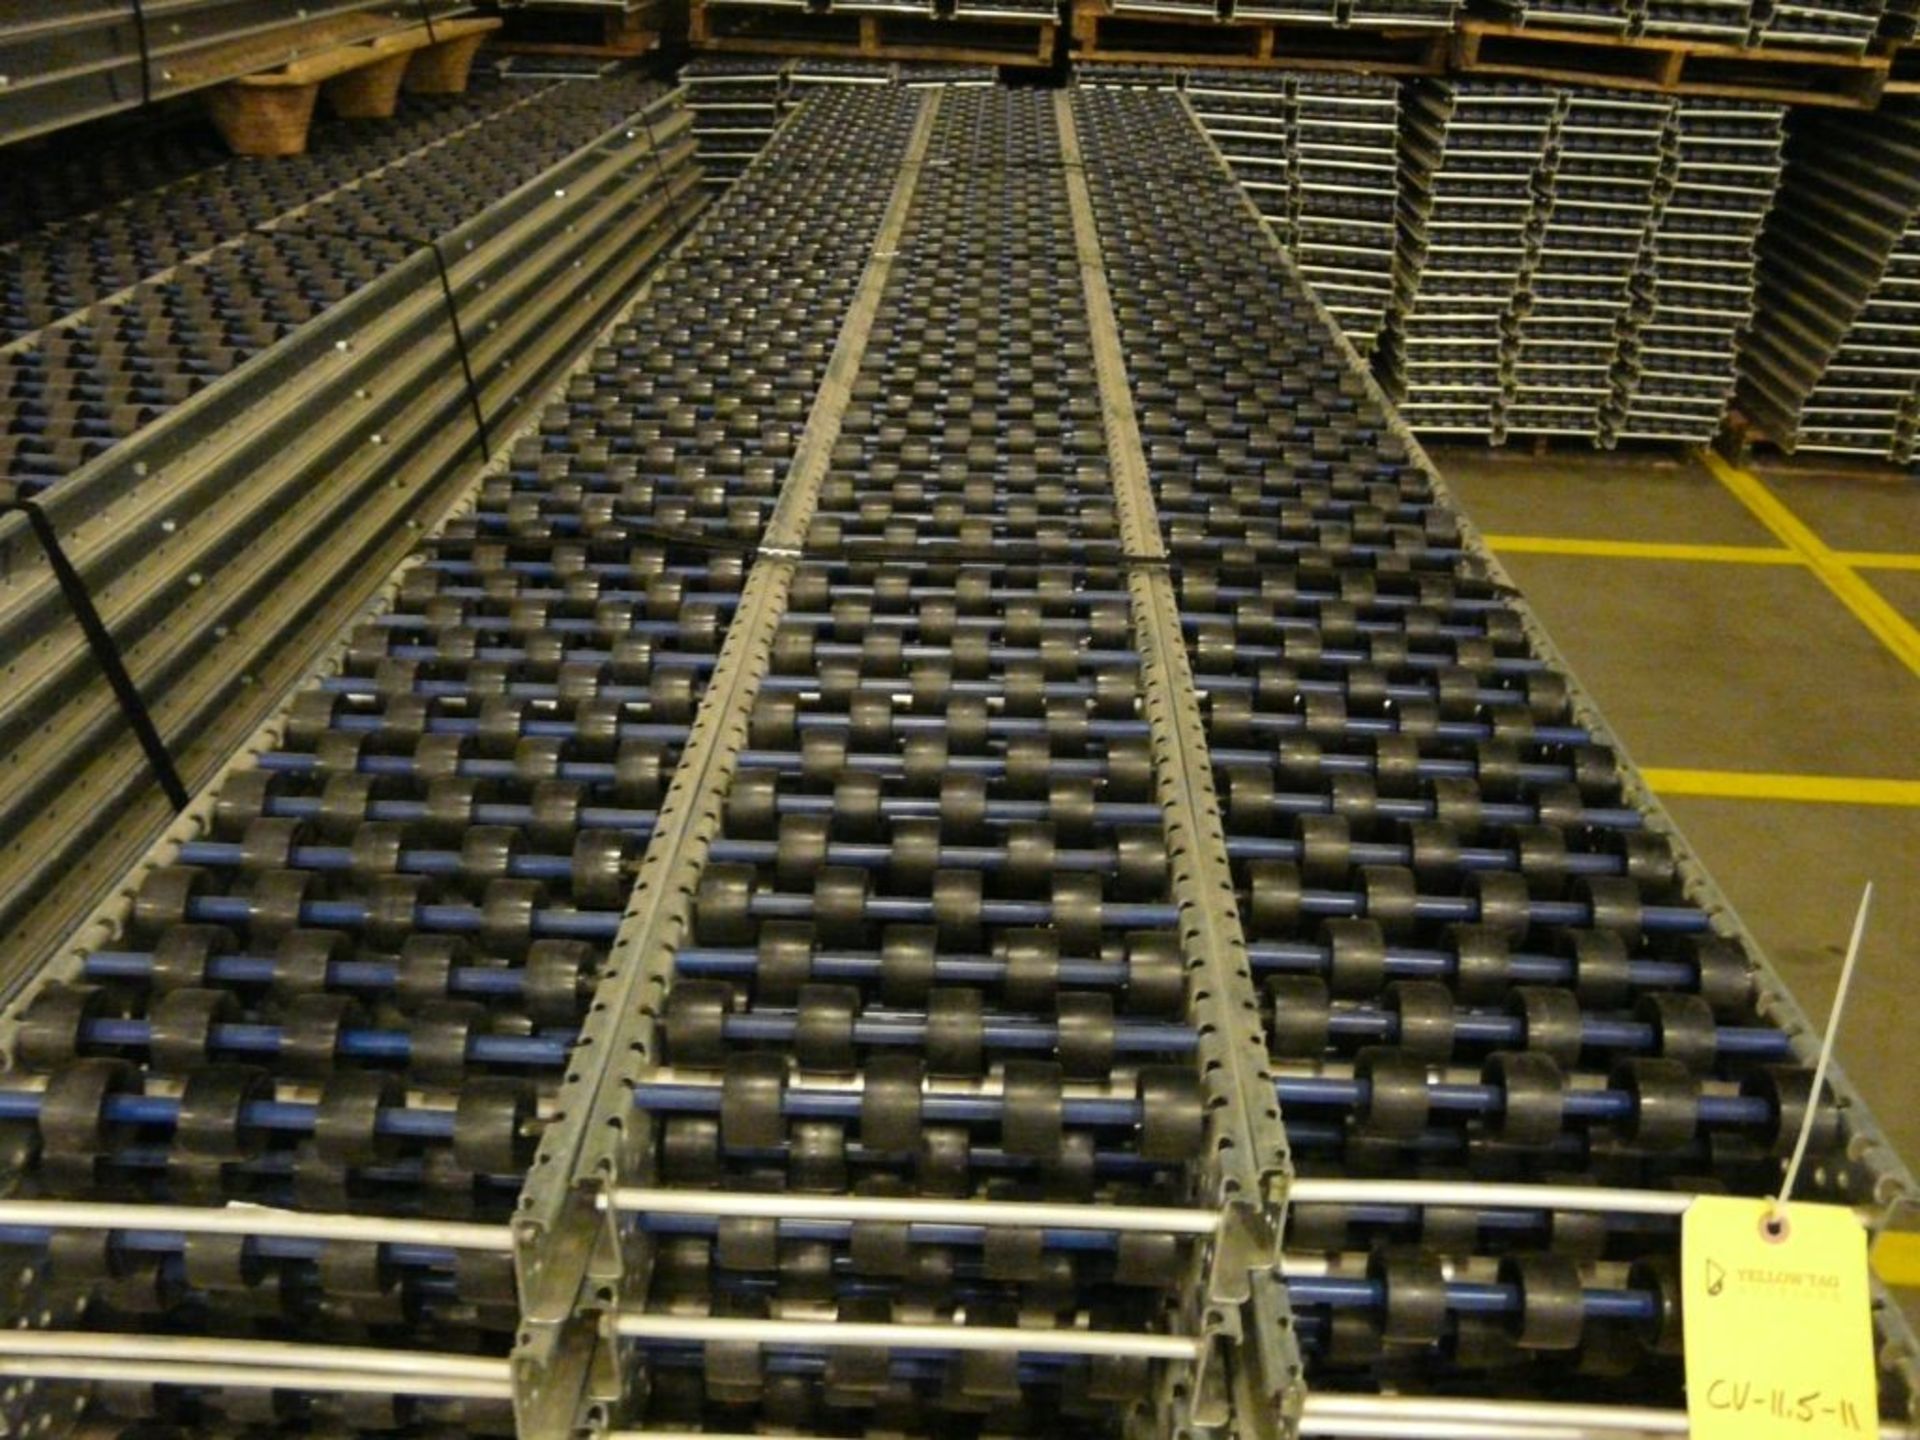 Lot of (90) SpanTrack Wheelbed Carton Flow Conveyors - 11.5'L x 11"W; Tag: 223641 - $30 Lot - Image 3 of 4